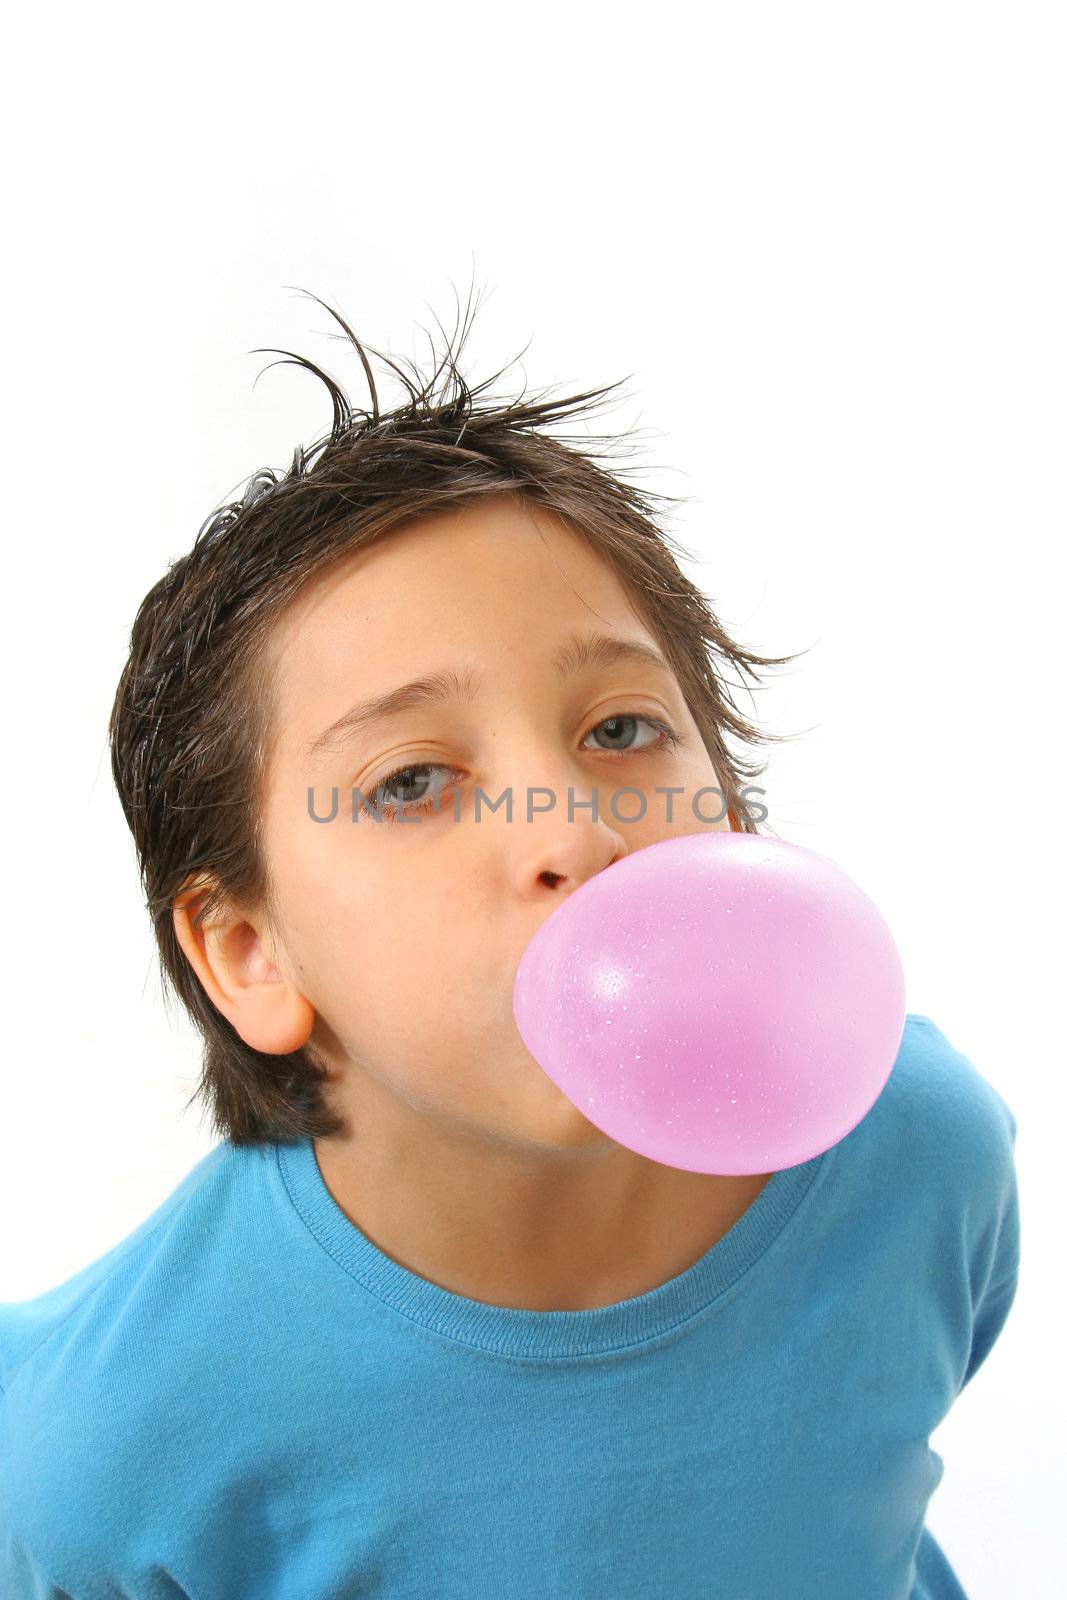 Bubble gum boy portrait with fun expressions. Look at my galery for more pictures of this model